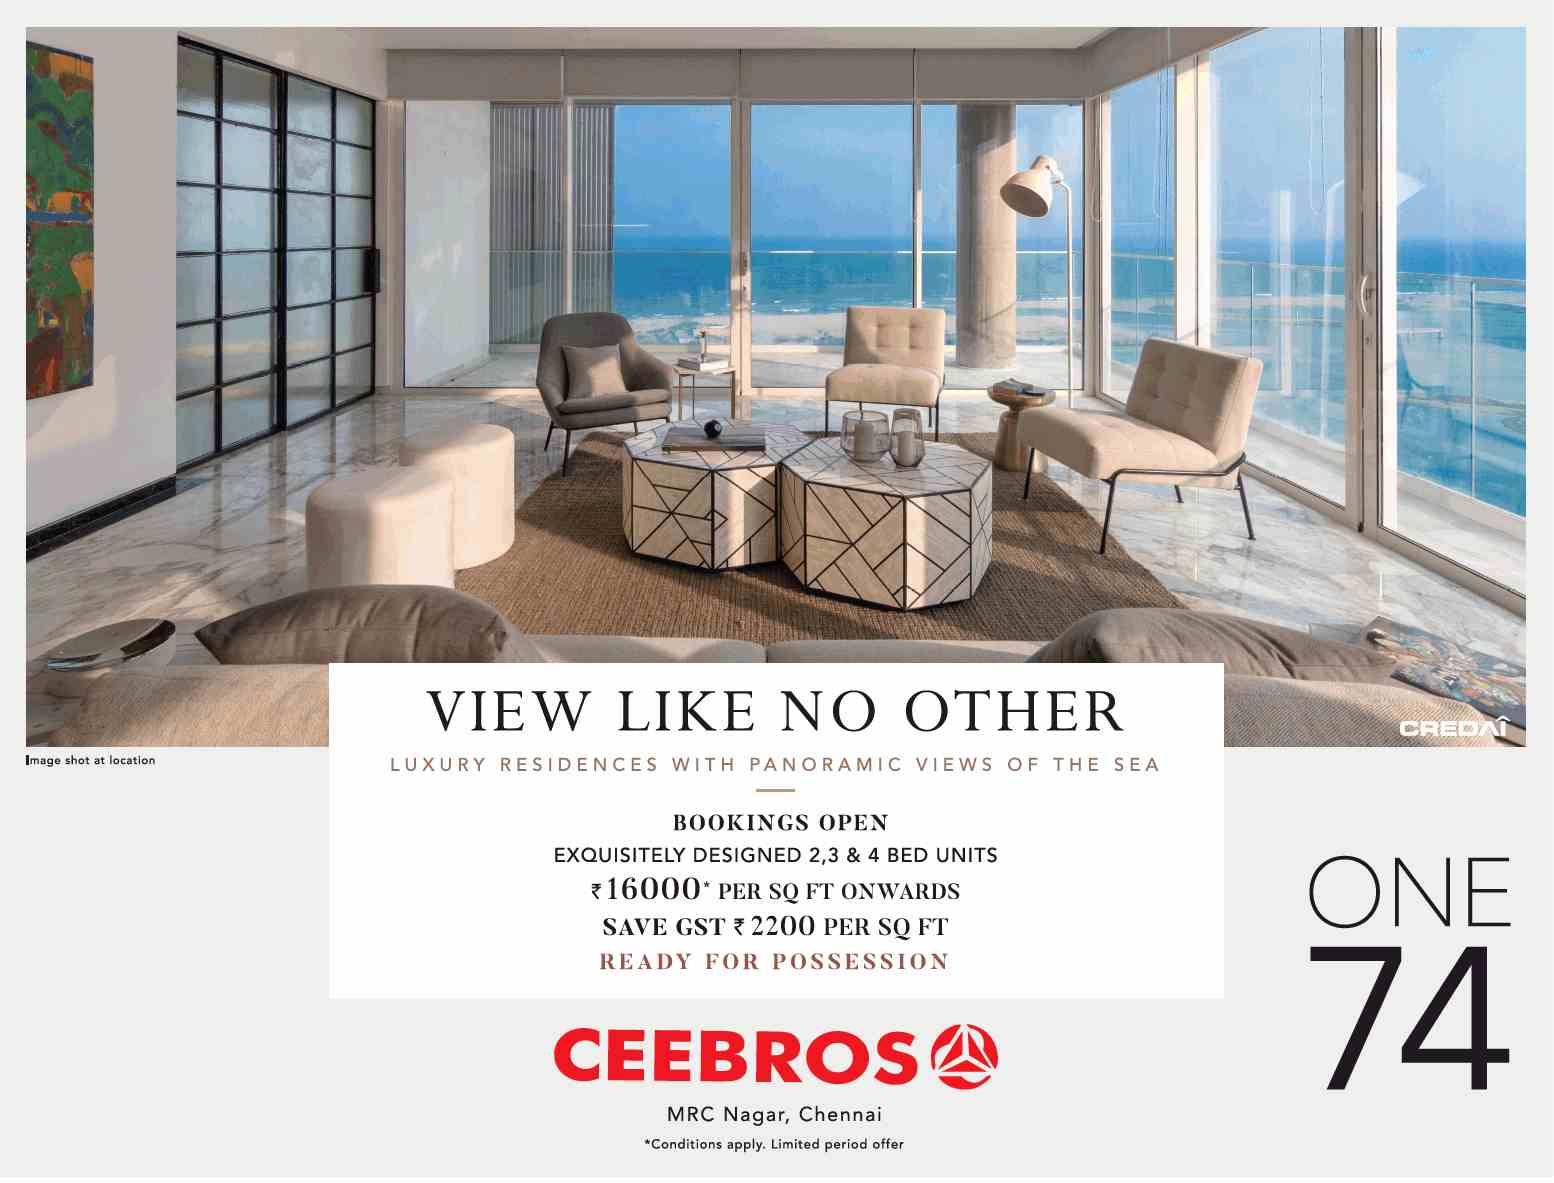 Book exquisitely designed home @ Rs. 16,000 per sq.ft. onwards at Ceebros One 74 in Chennai Update